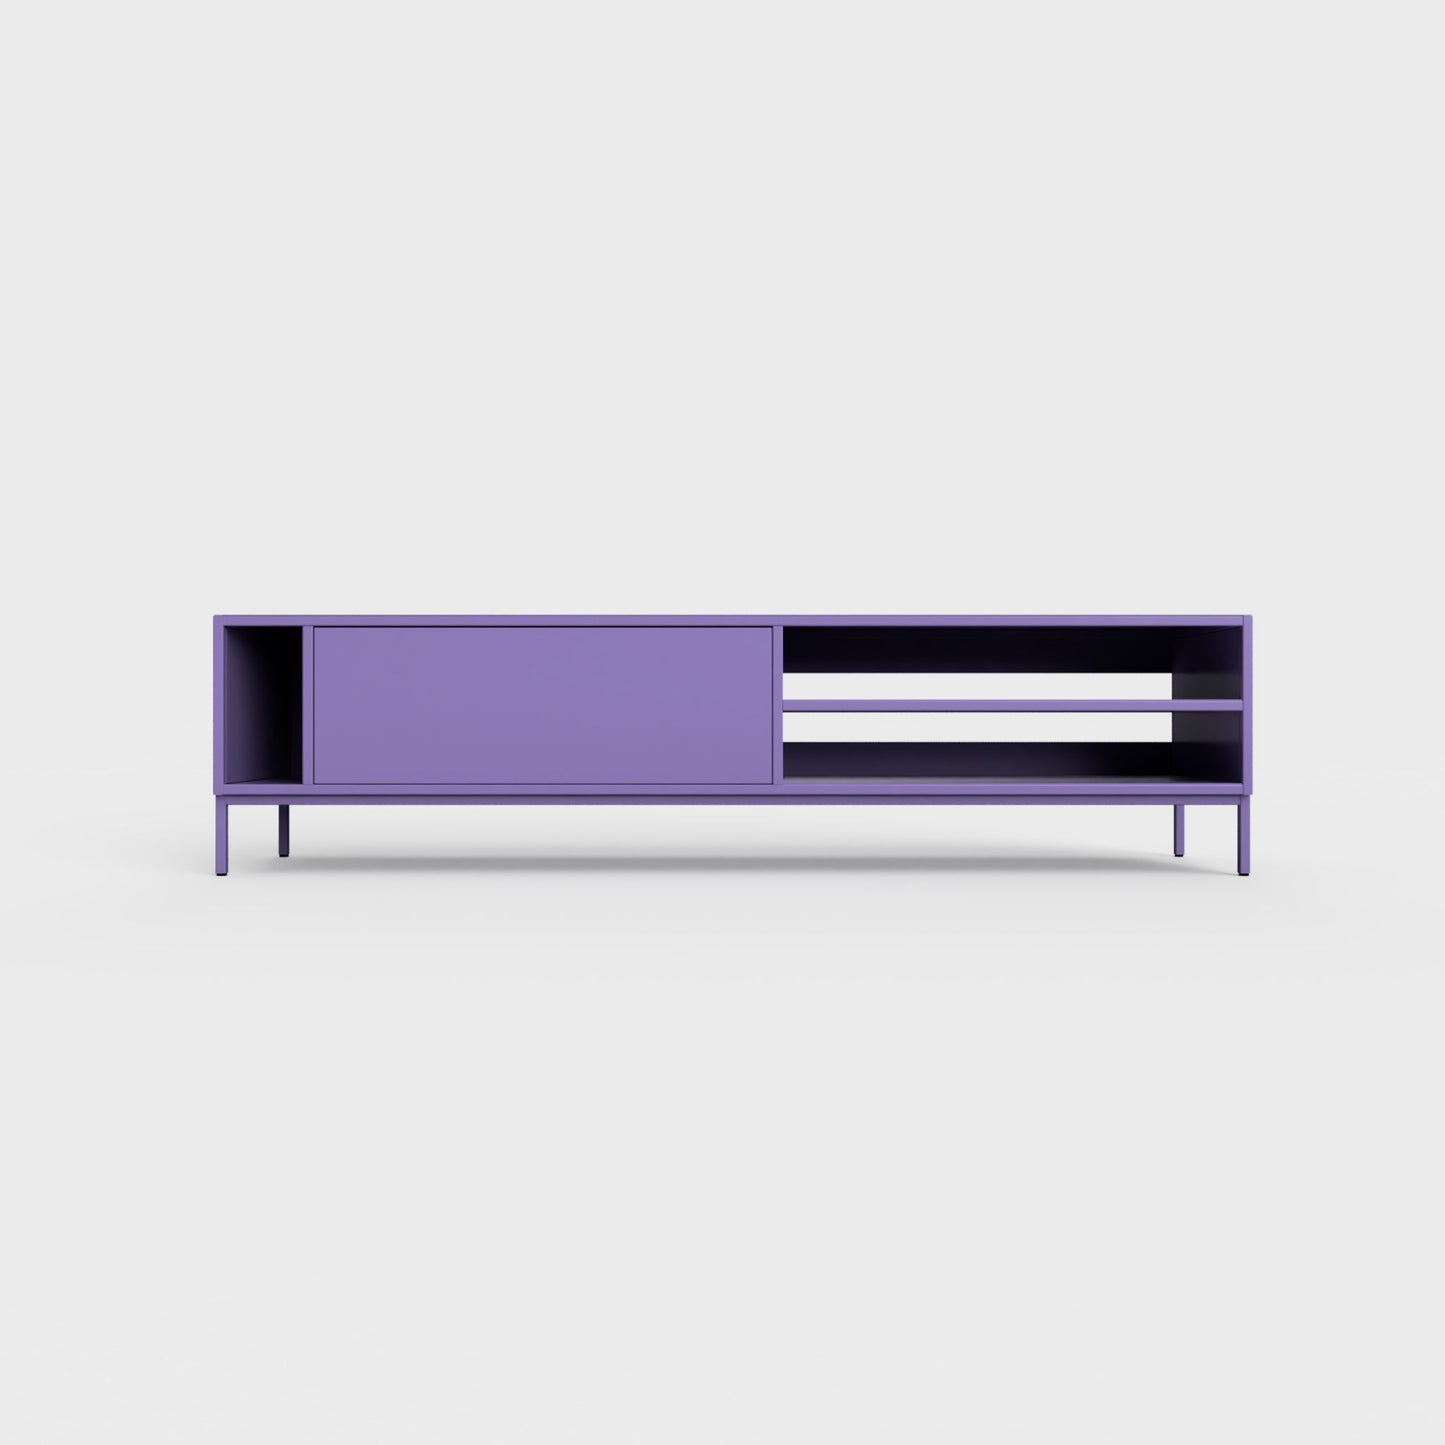 Prunus 03 Lowboard in iris violet color, powder-coated steel, elegant and modern piece of furniture for your living room